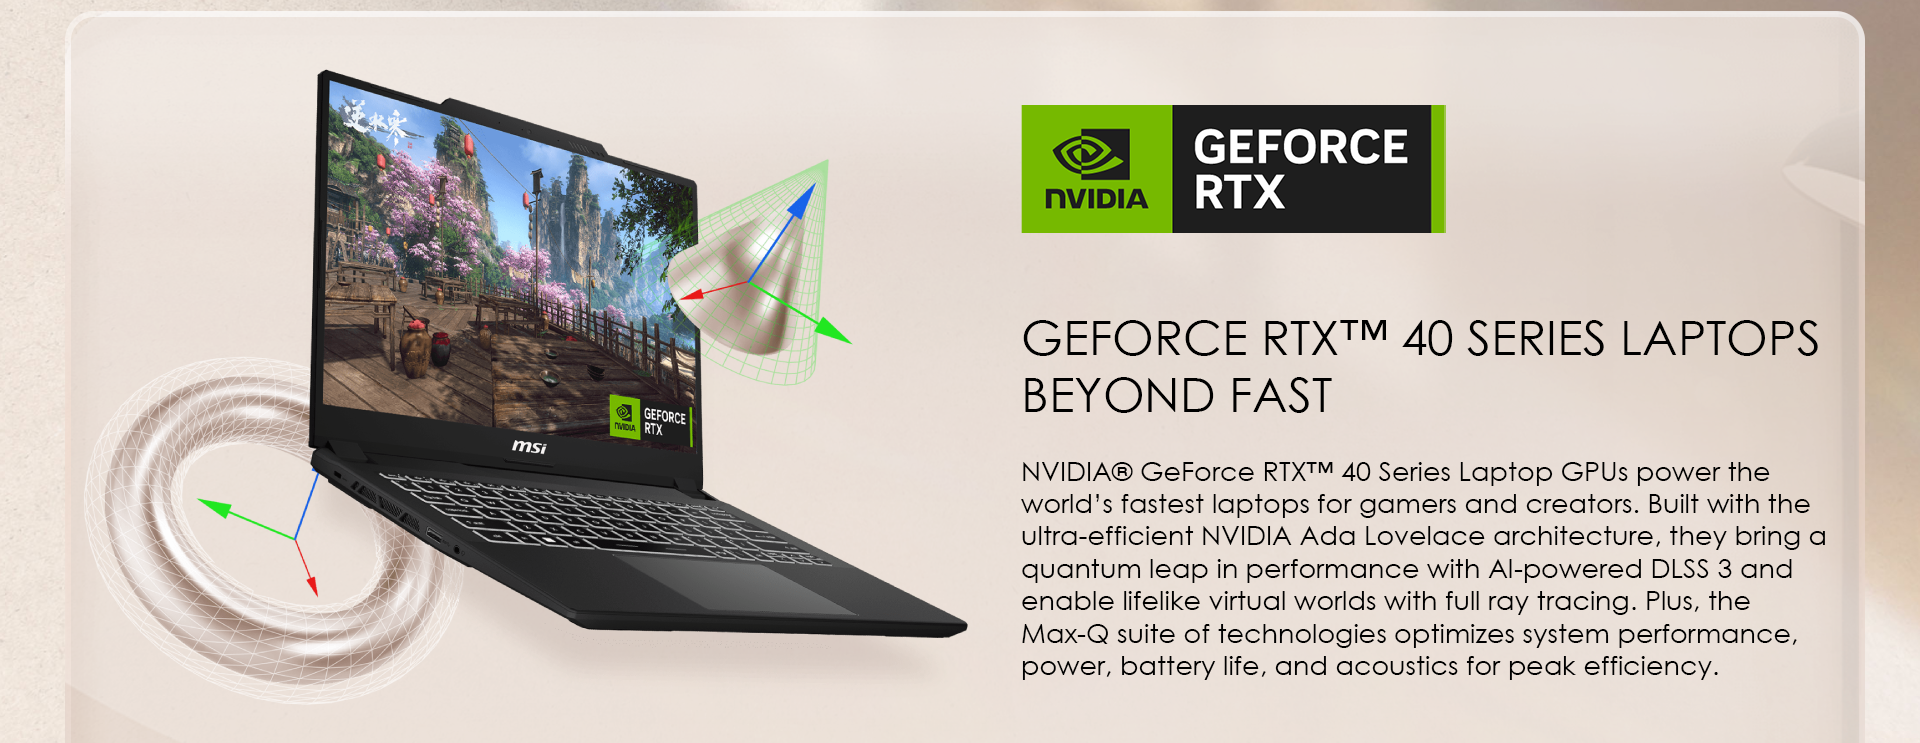 NVIDIA® GeForce RTX™ 40 Series Laptop GPUs power the world’s fastest laptops for gamers and creators. Built with the ultra-efficient NVIDIA Ada Lovelace architecture, they bring a quantum leap in performance with AI-powered DLSS 3 and enable lifelike virtual worlds with full ray tracing. Plus, the Max-Q suite of technologies optimizes system performance, power, battery life, and acoustics for peak efficiency.